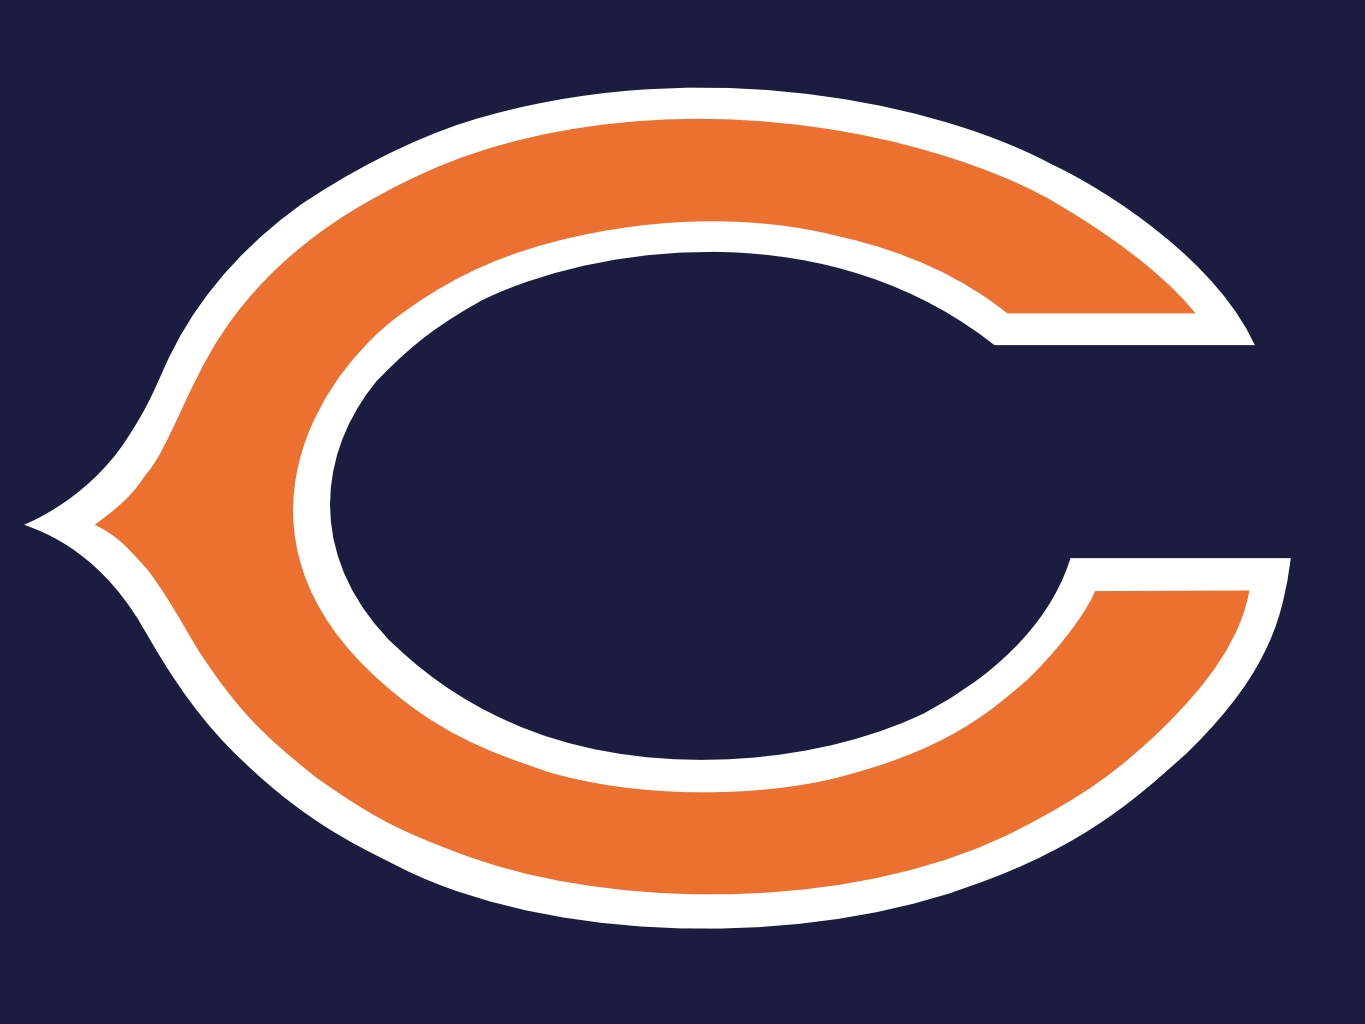 Chicago Bears Clipart